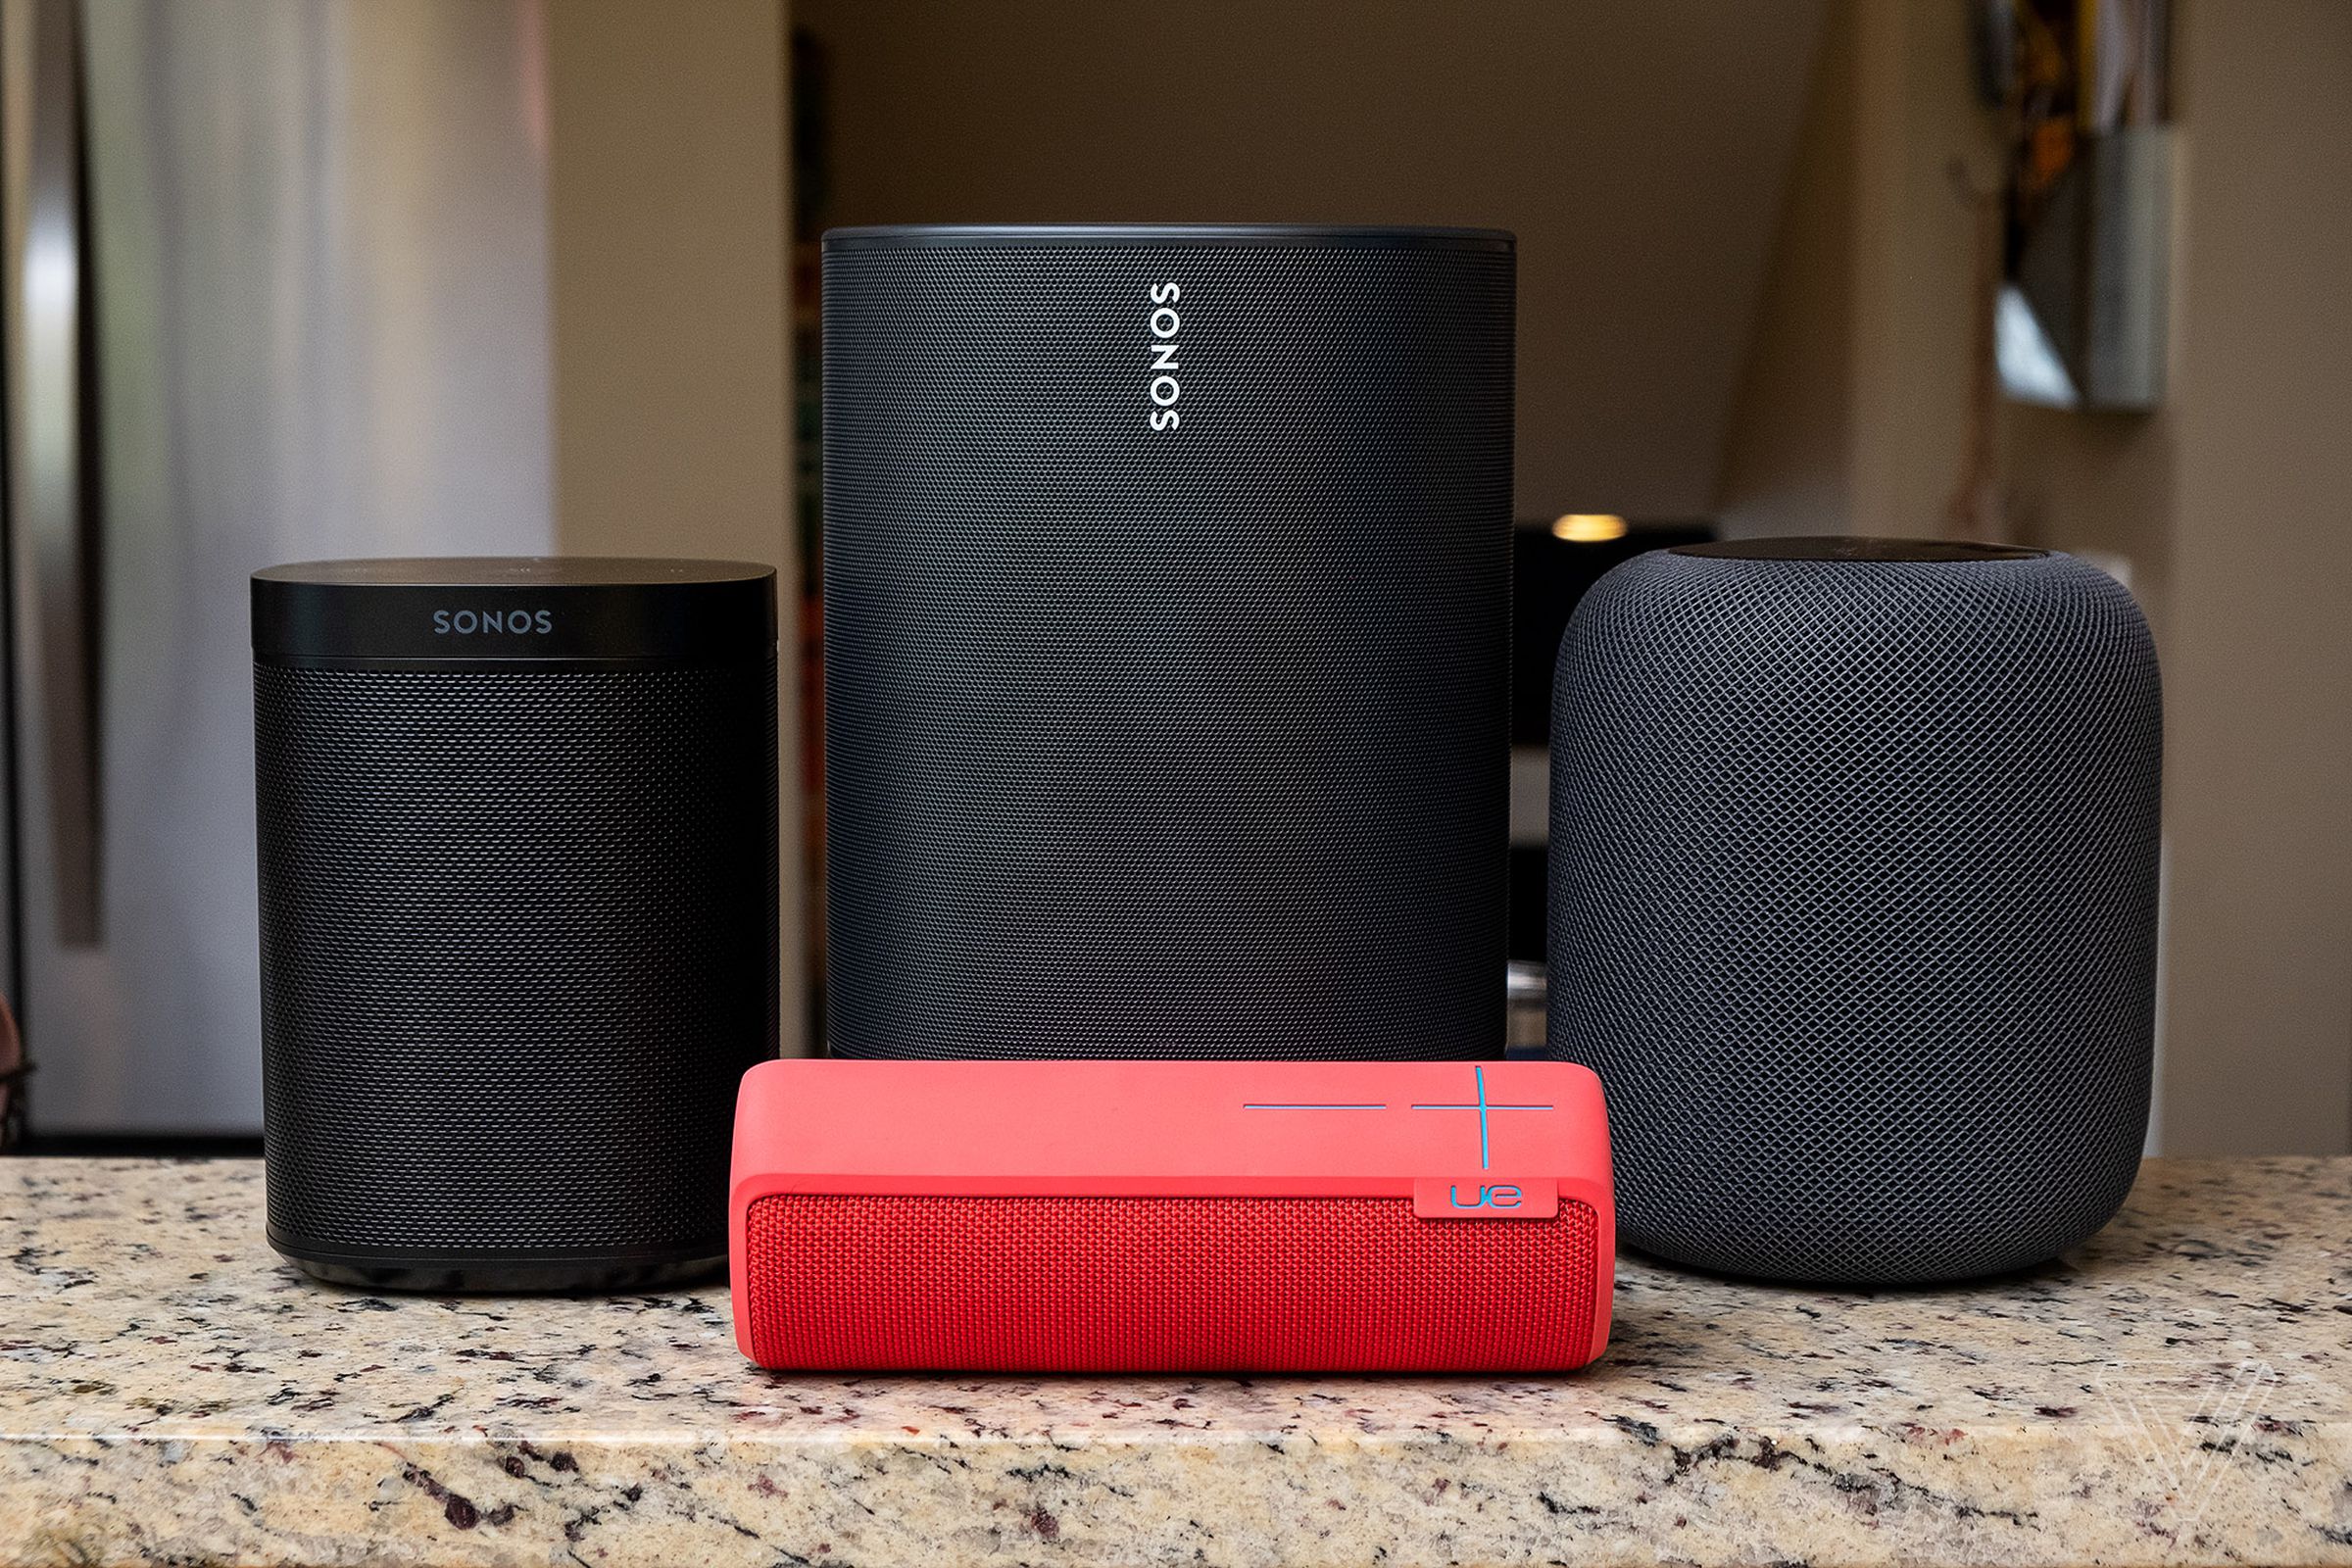 The Sonos Move is considerably larger than the Sonos One, Apple HomePod, or a typical Bluetooth speaker such as the UE Boom 2.